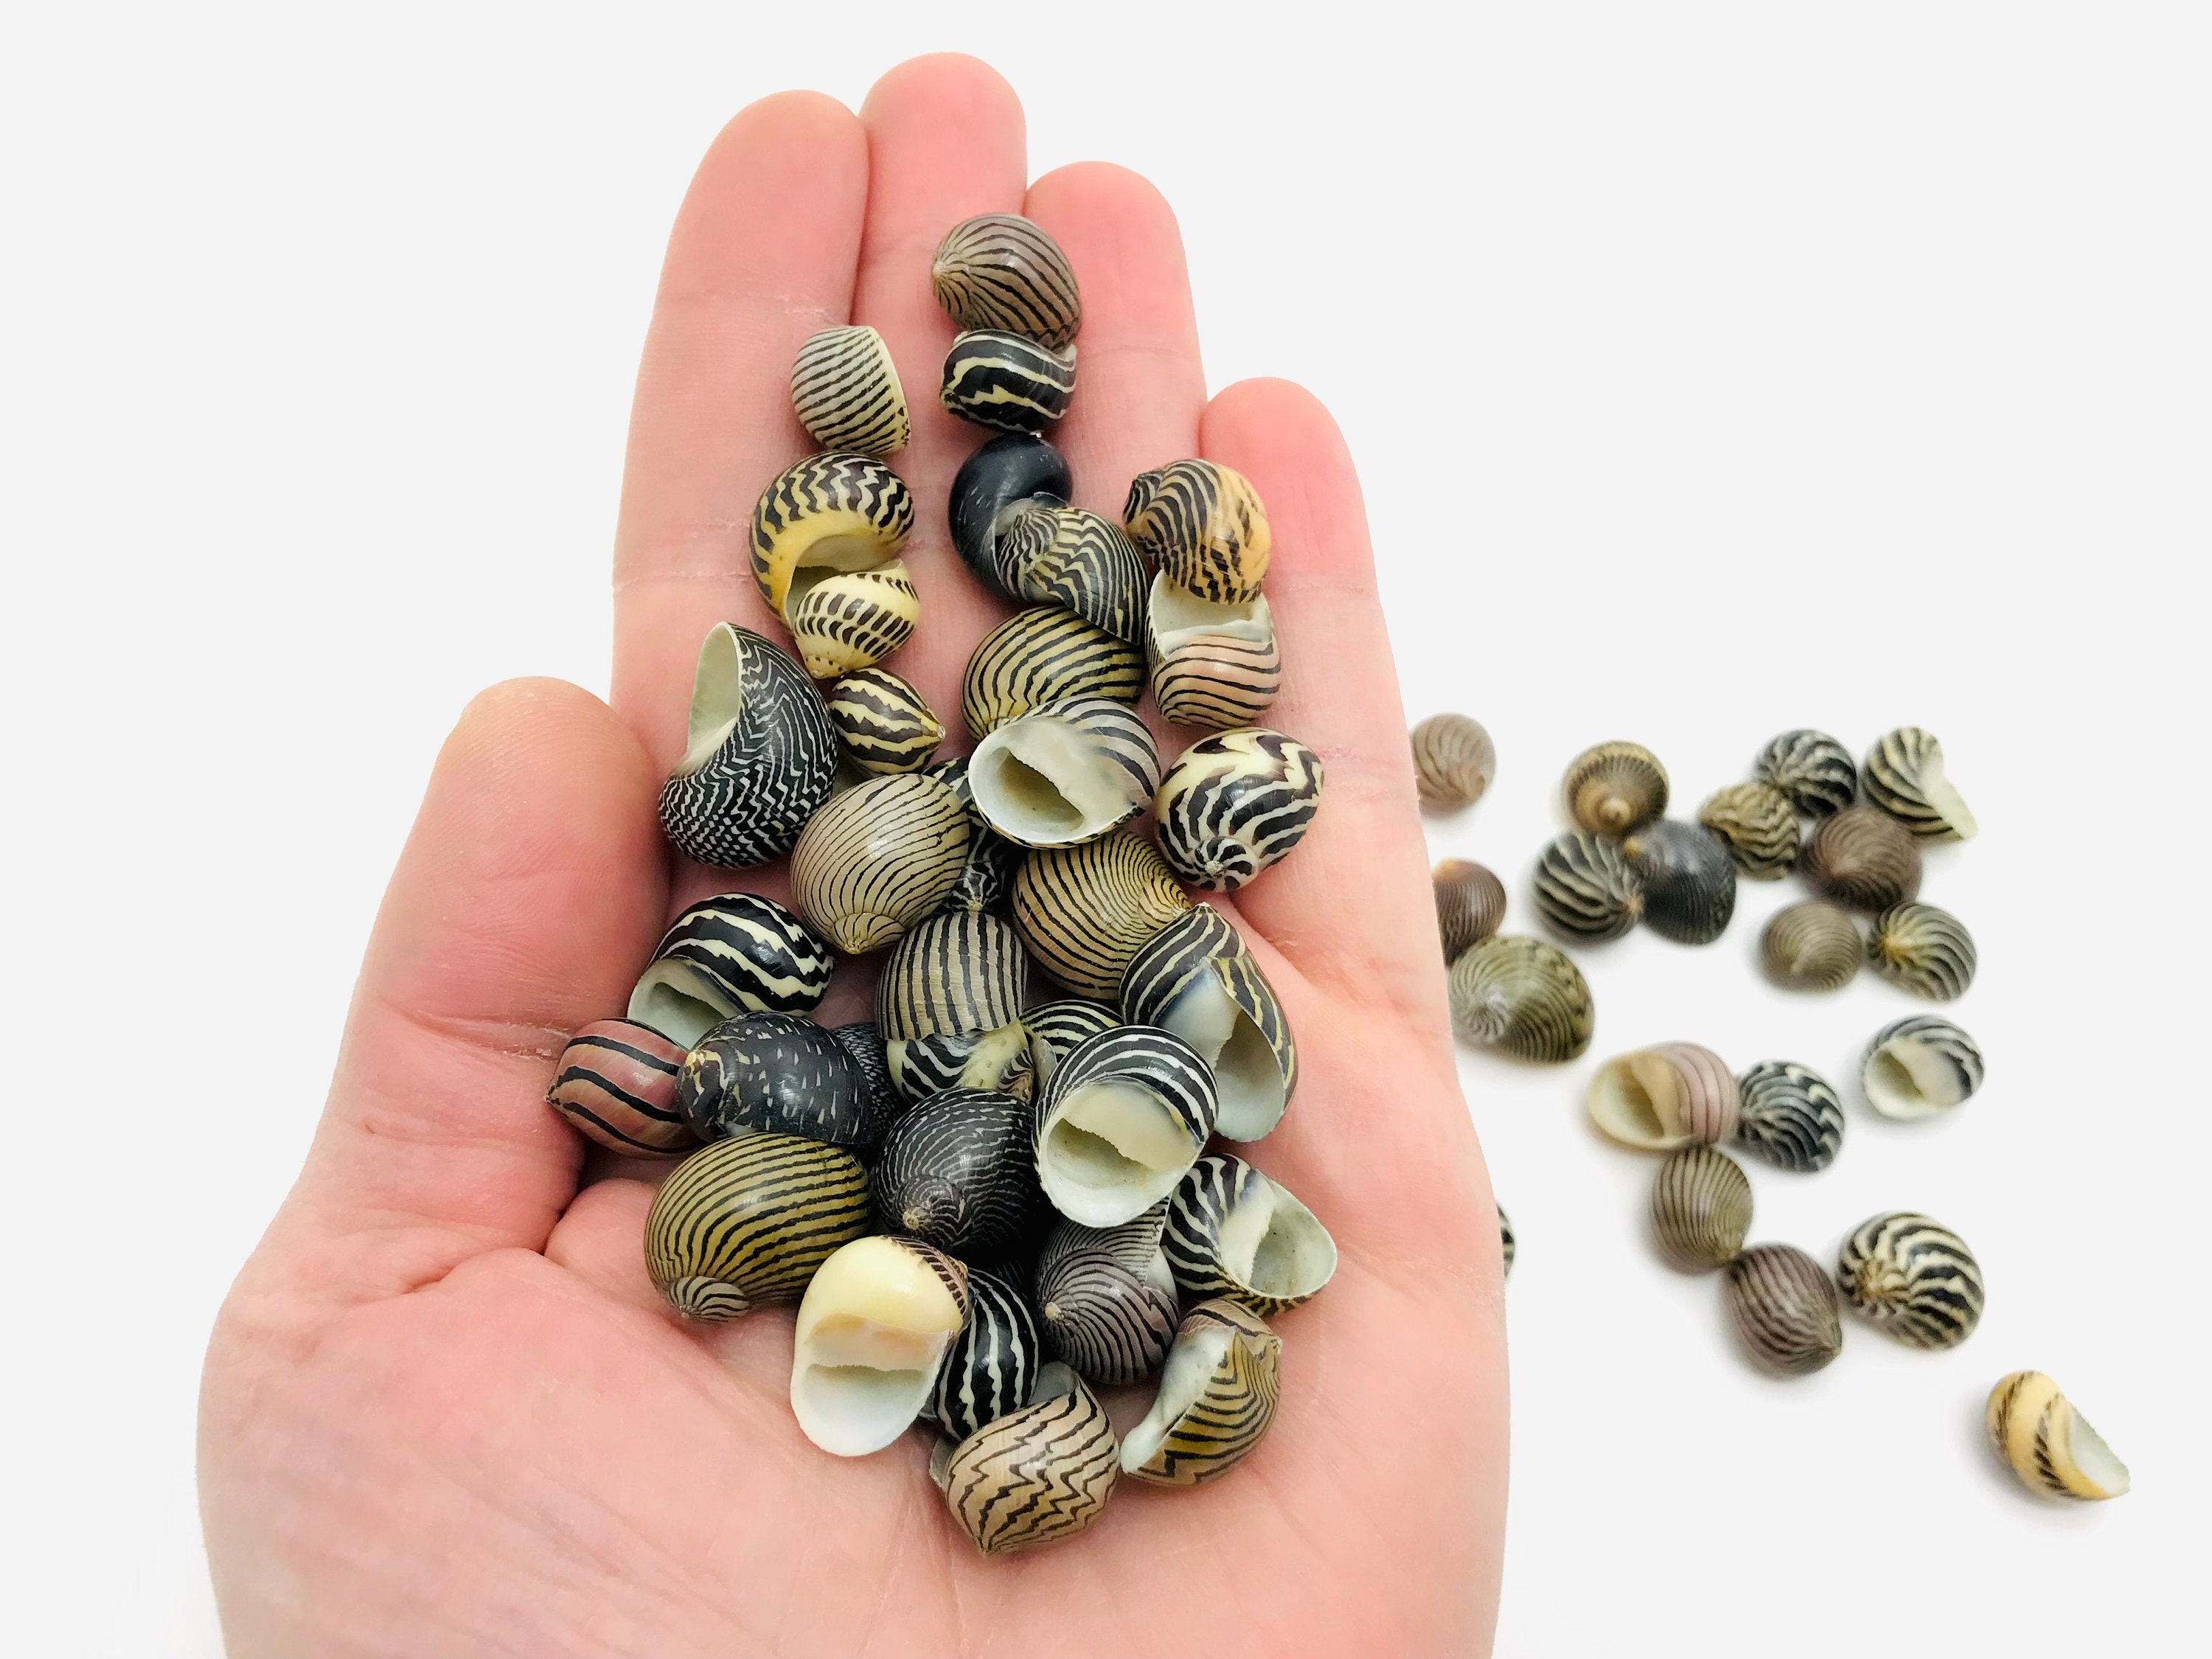 Cabinet, - Shells Shells, Shell, for Creative Neritina, Curiosity Small Shell Collectible Nerite Etsy Leisure, Striped Zebra